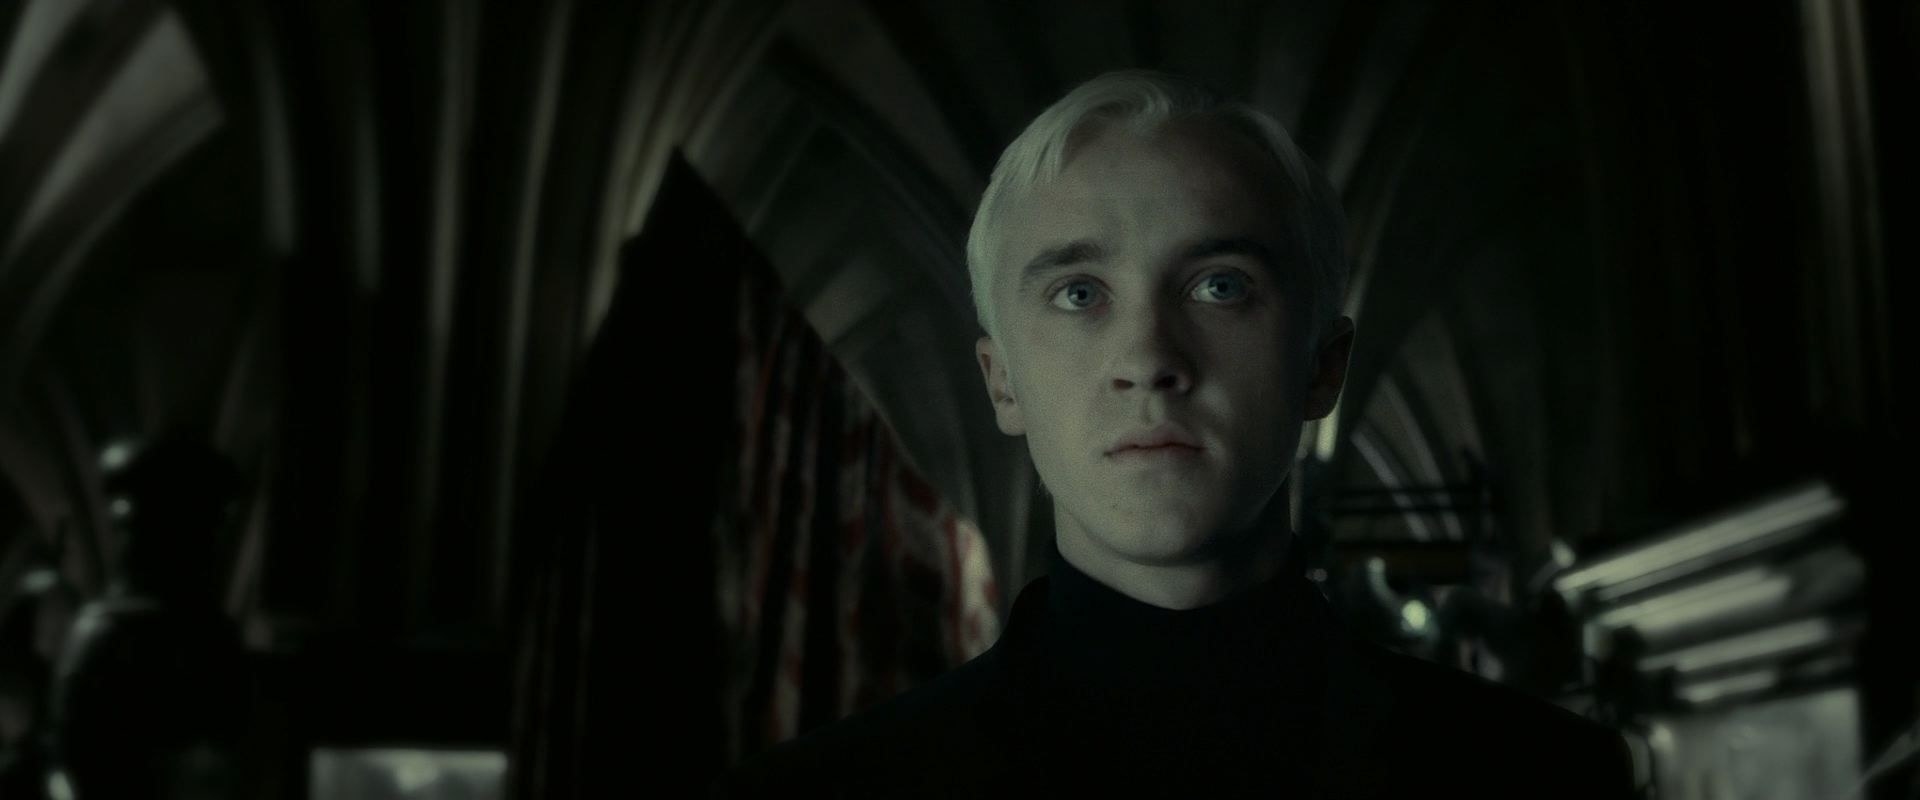 A closeup of Draco Malfoy looking pale and somber